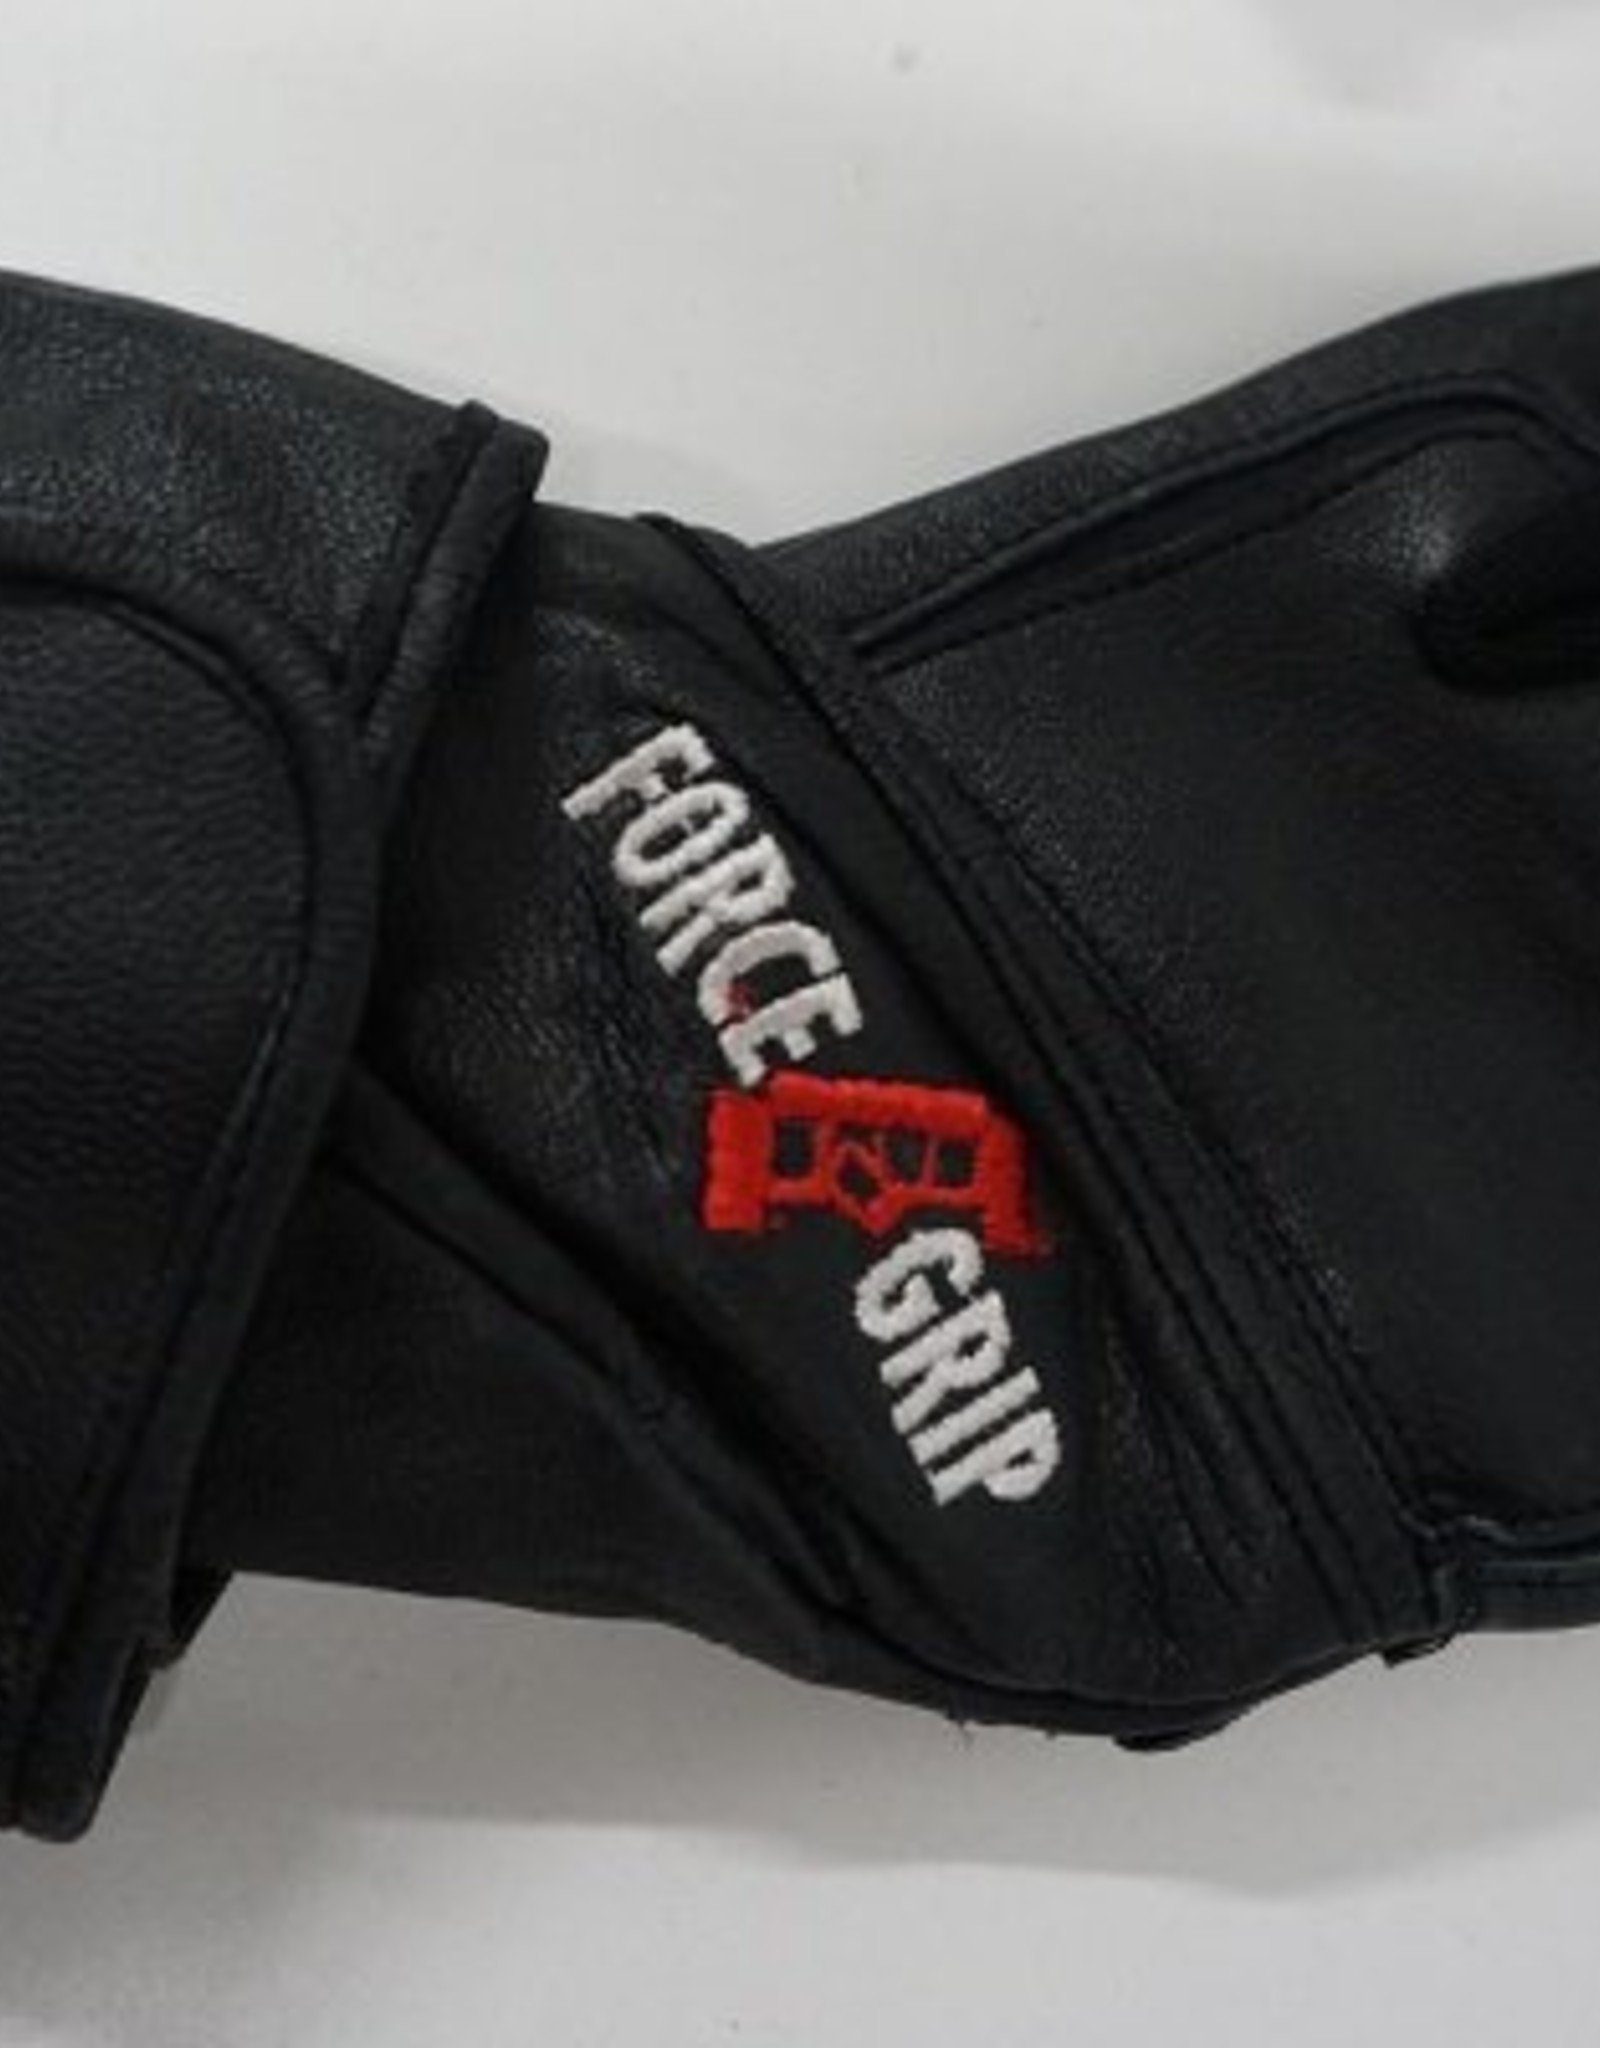 UP Power UP Power wrist wrap gloves